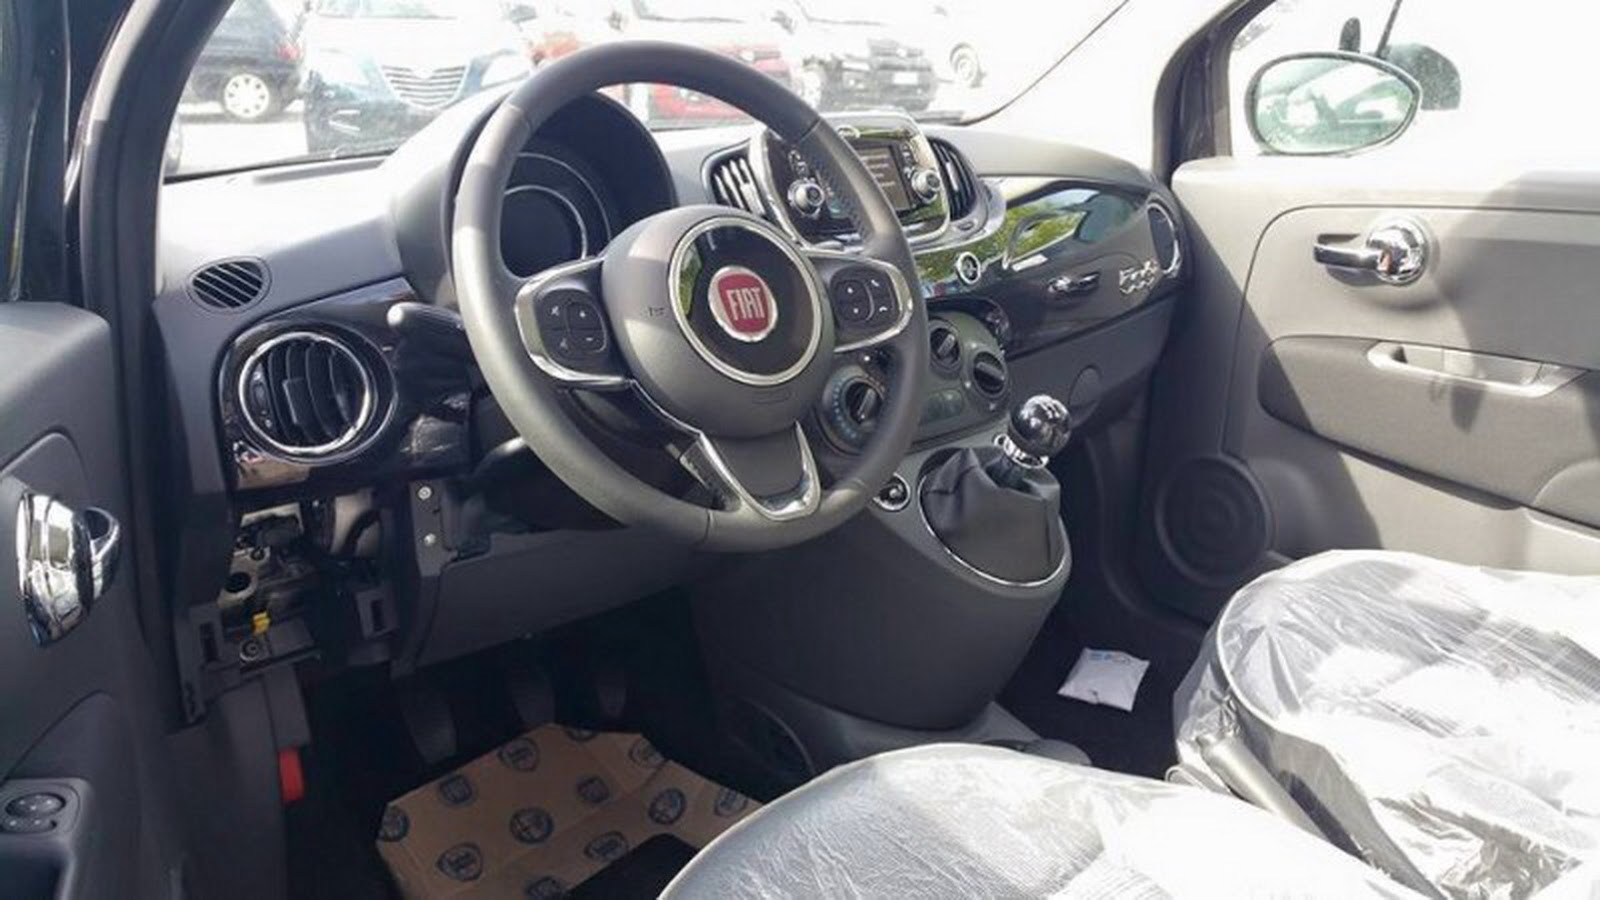 Welp First Photo Of 2016 Fiat 500 Facelift's Interior Reveals UH-25